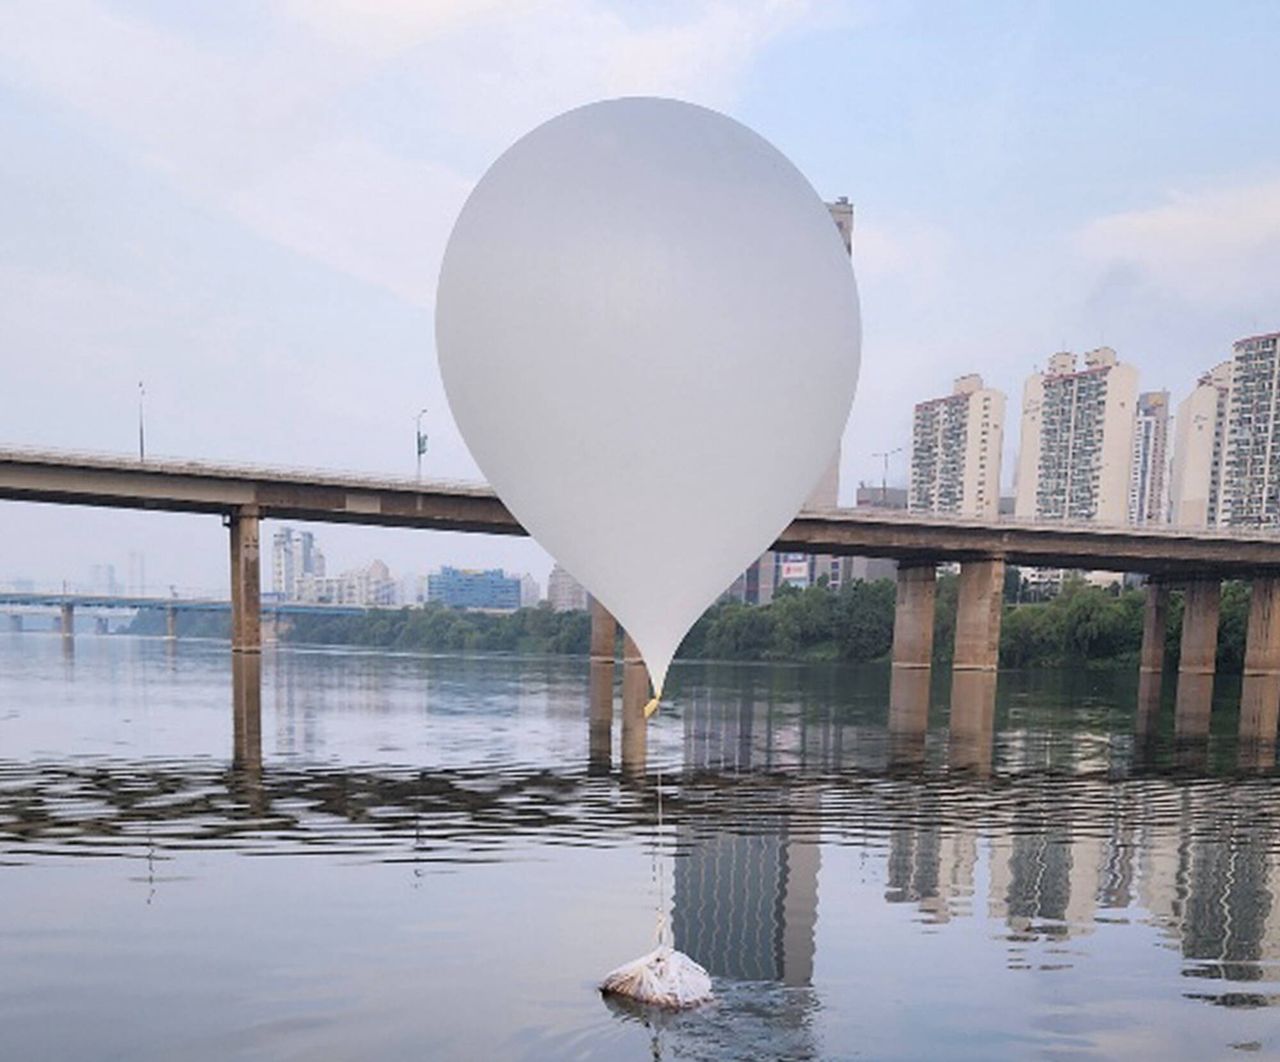 North Korea has once again sent balloons with trash to South Korea.